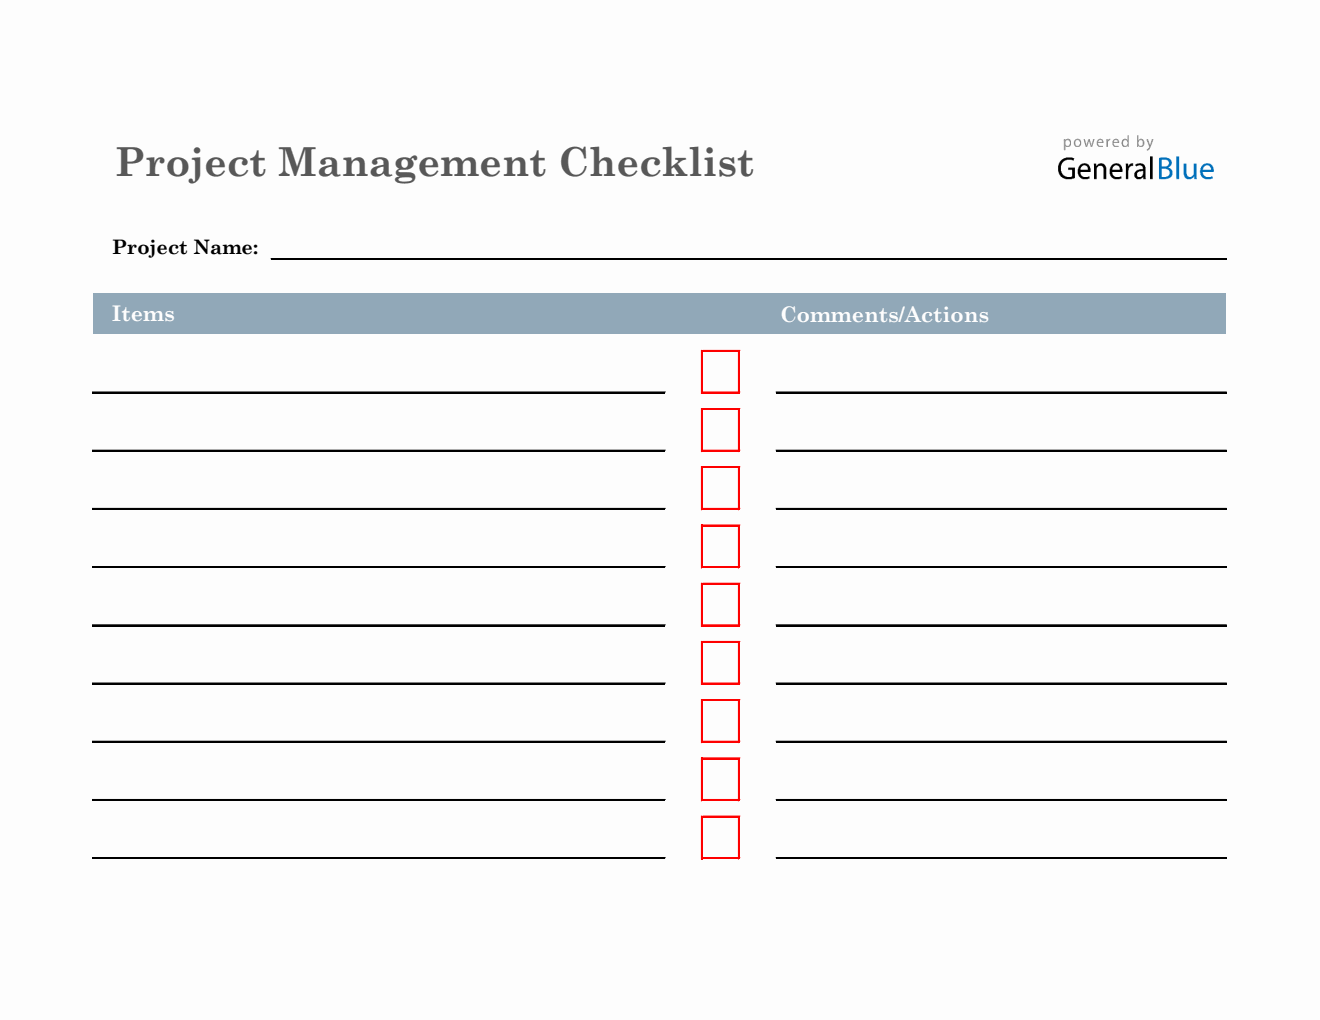 Project Management Checklist in Excel